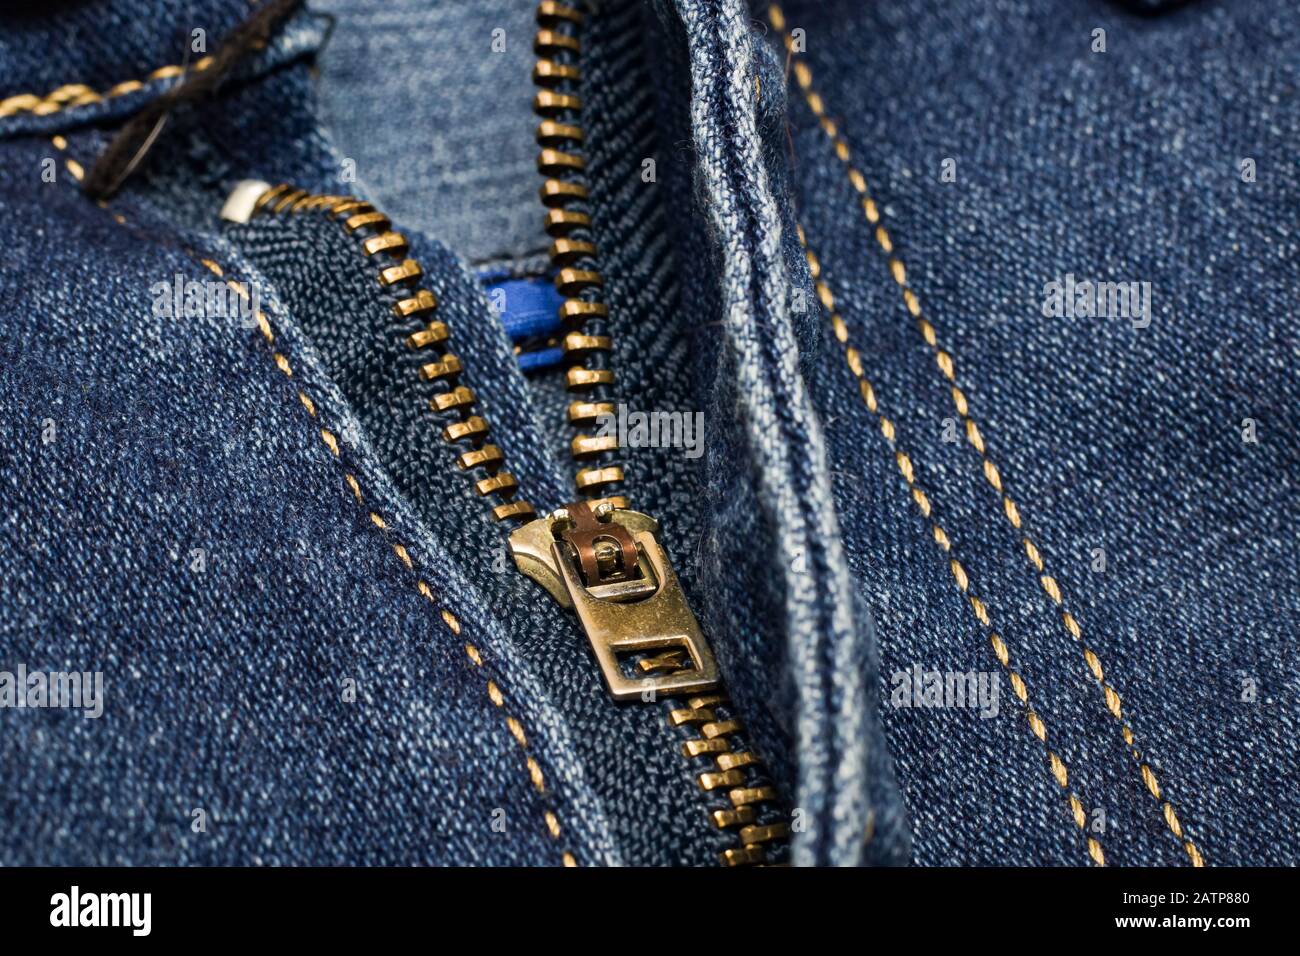 Denim texture. The background. Dark blue jeans. Jeans zipper. Pants fly  close-up. Lock, clasp, butto Stock Photo by Chibelek